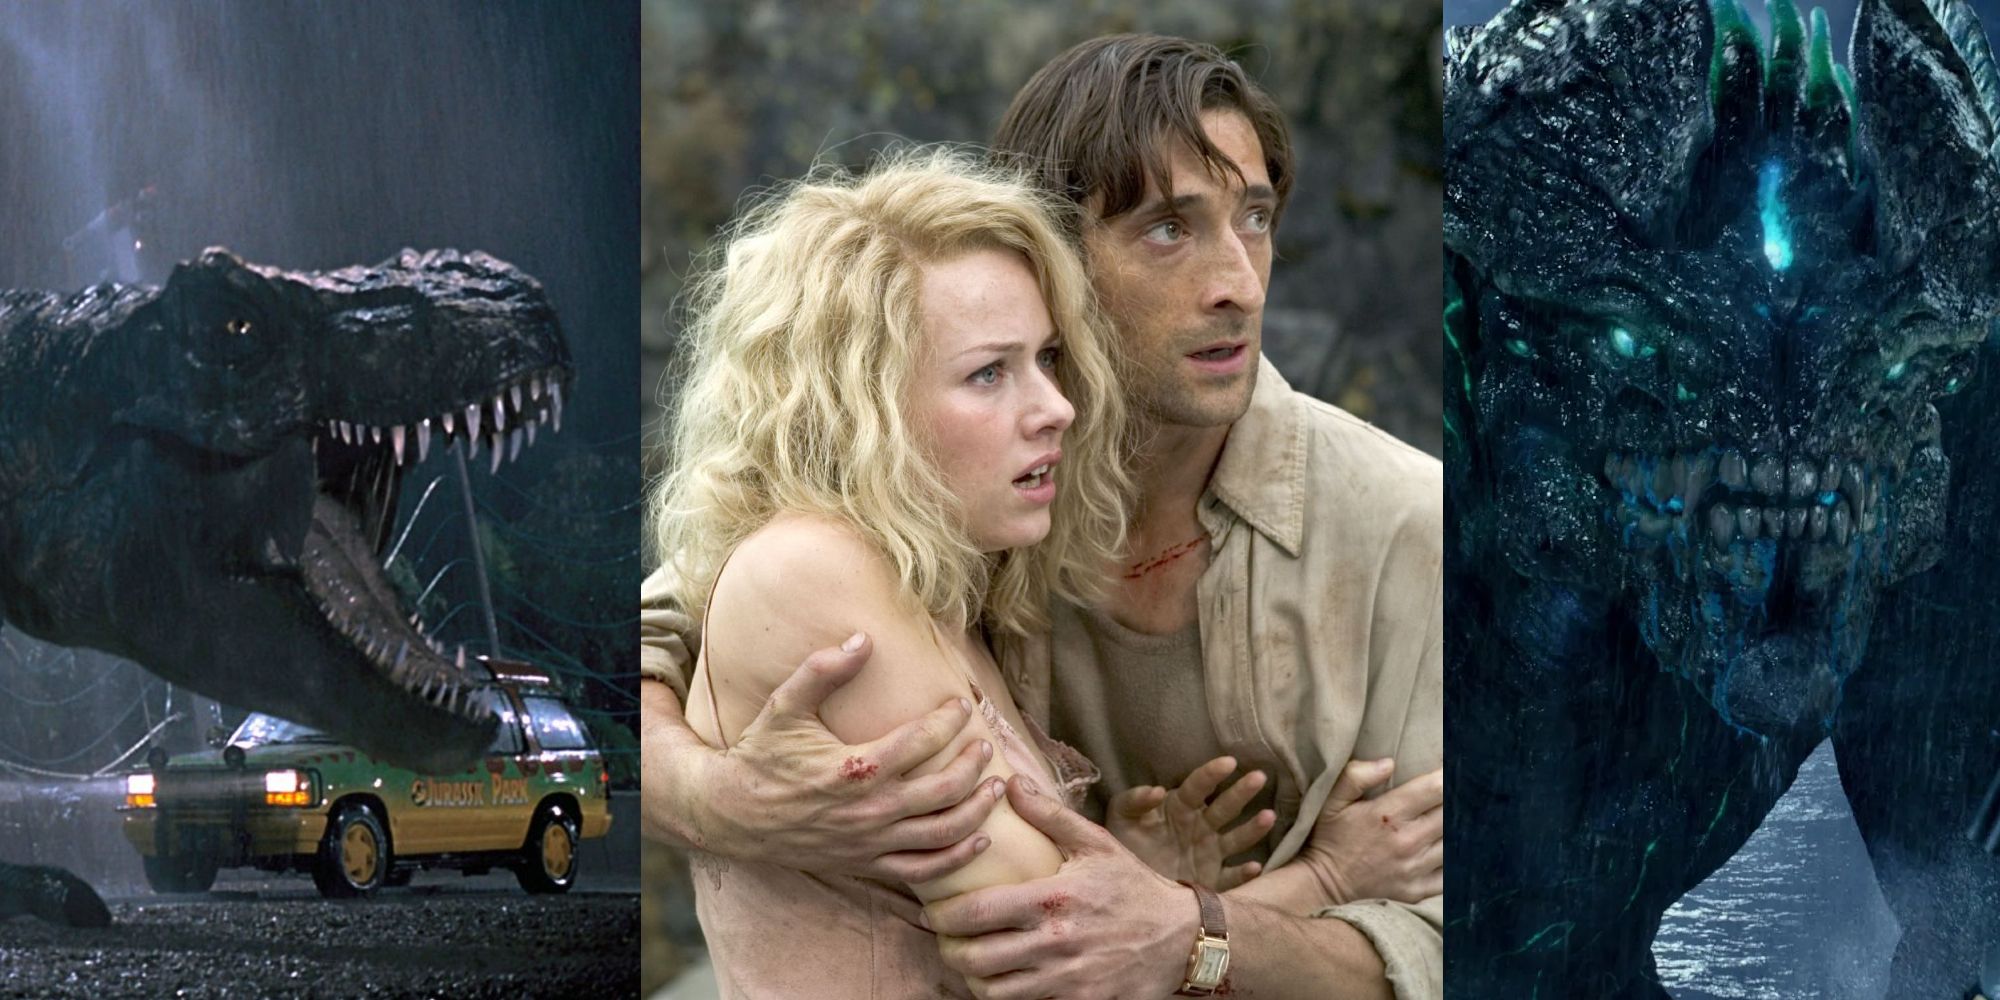 The T-Rex in the infamous scene from Jurassic Park; Adrien Brody and Naomi Watts embracing in King Kong (2005); a kaiju from Pacific Rim coming out of the water